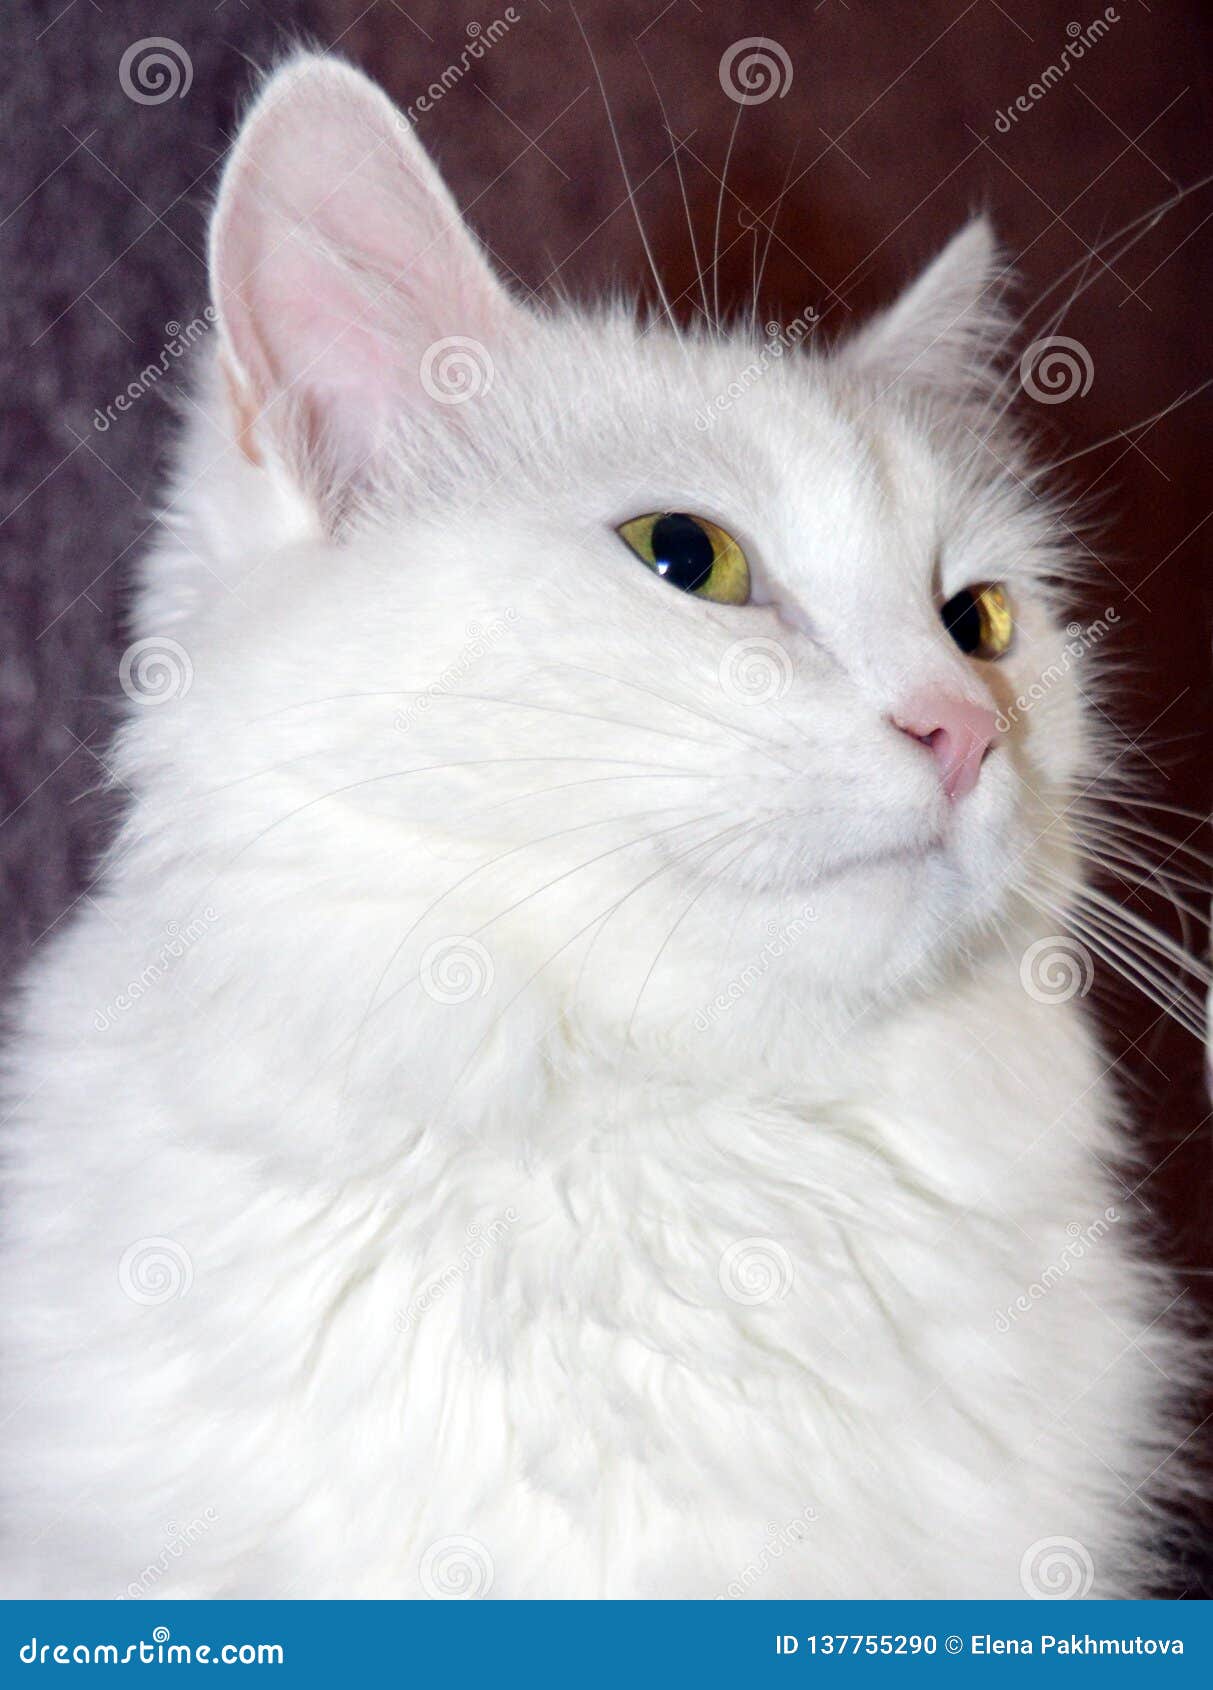 Cat Kitten White Pet Animal Cute Feline Kitty Domestic Fur Young Adorable Blue Eyes Siberian Fluffy Portrait Baby Stock Photo Image Of Forest Grass 137755290